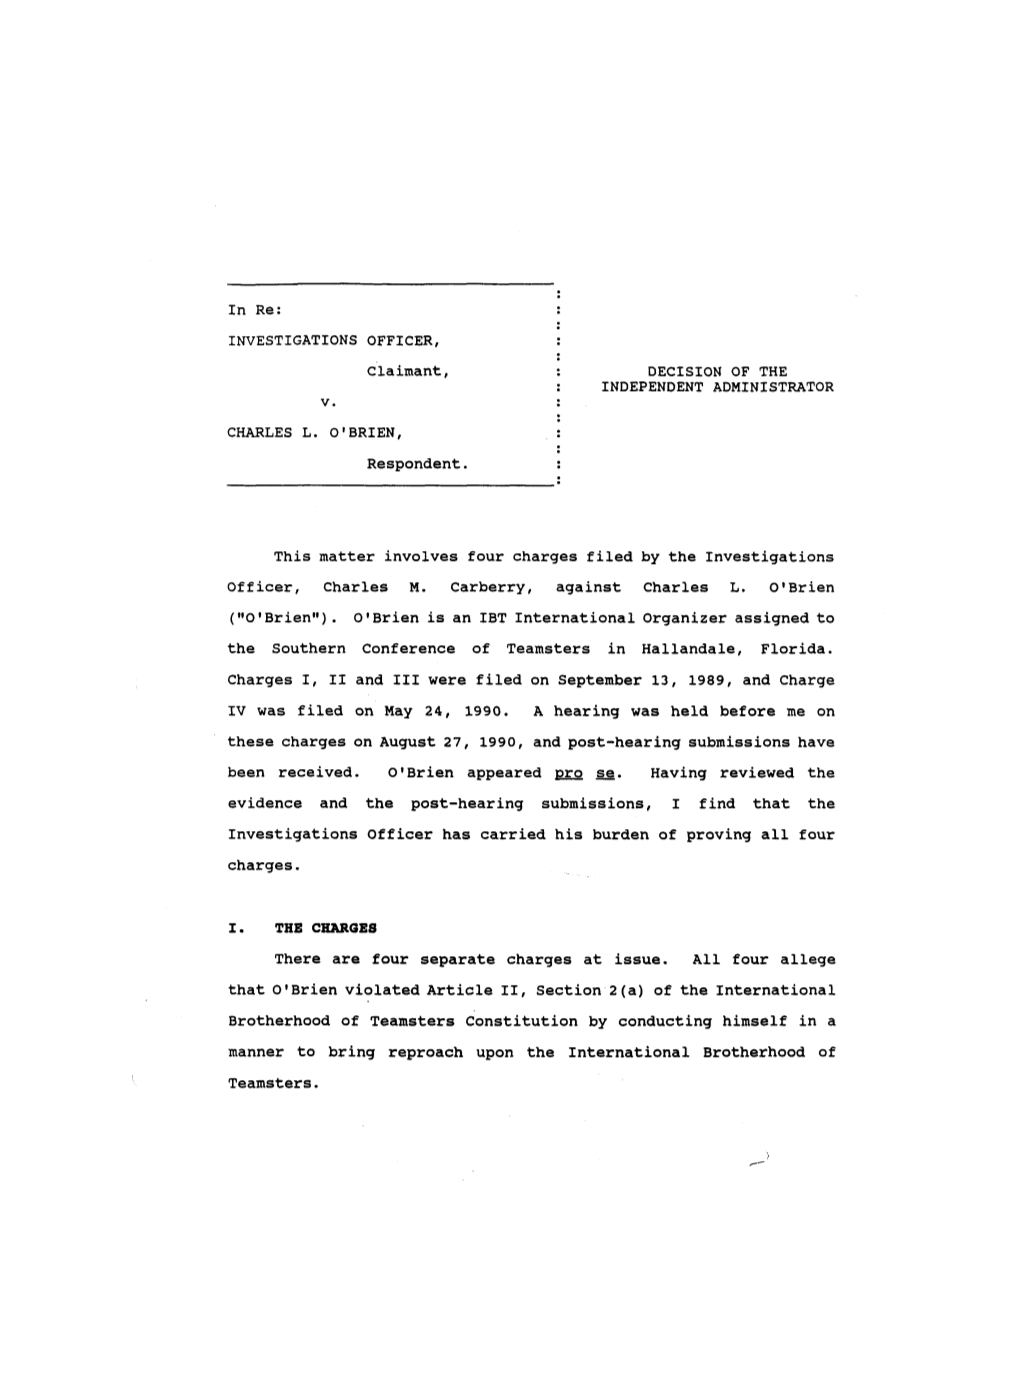 In Re: INVESTIGATIONS OFFICER, Claimant, V. CHARLES L. O'brien